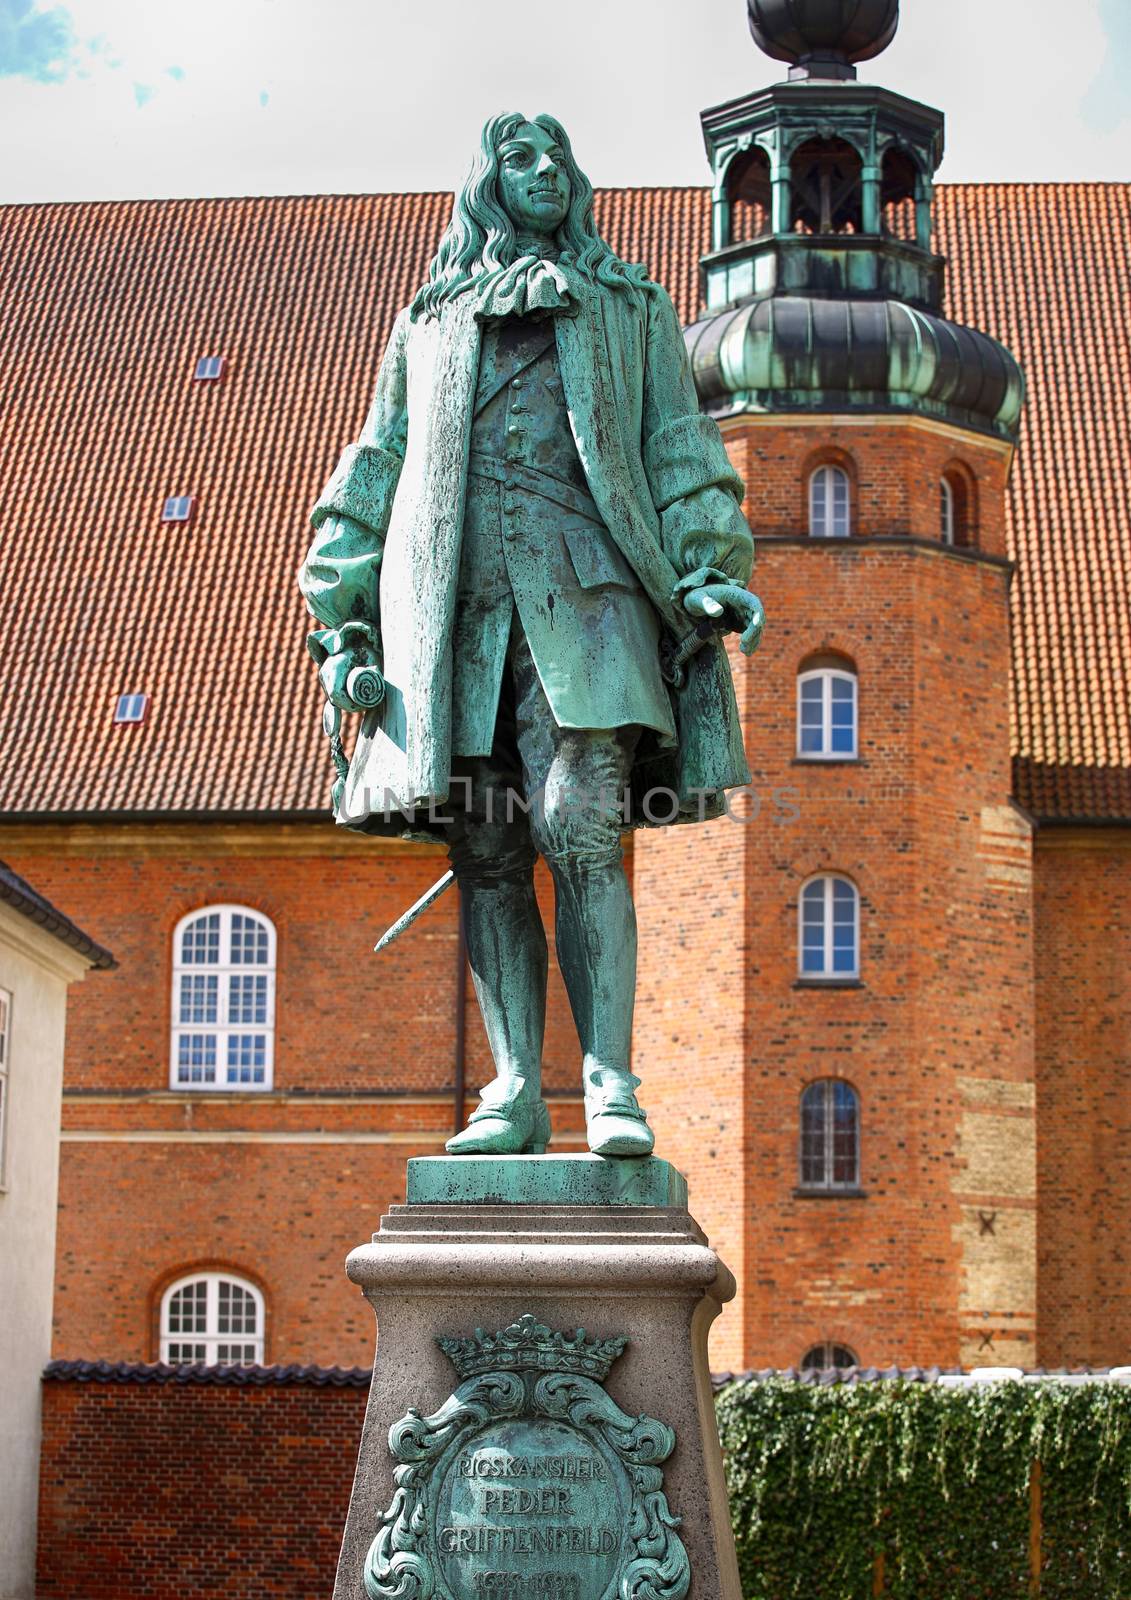 The statue of Chancellor Peder Griffenfeld and a tower in Copenhagen, Denmark